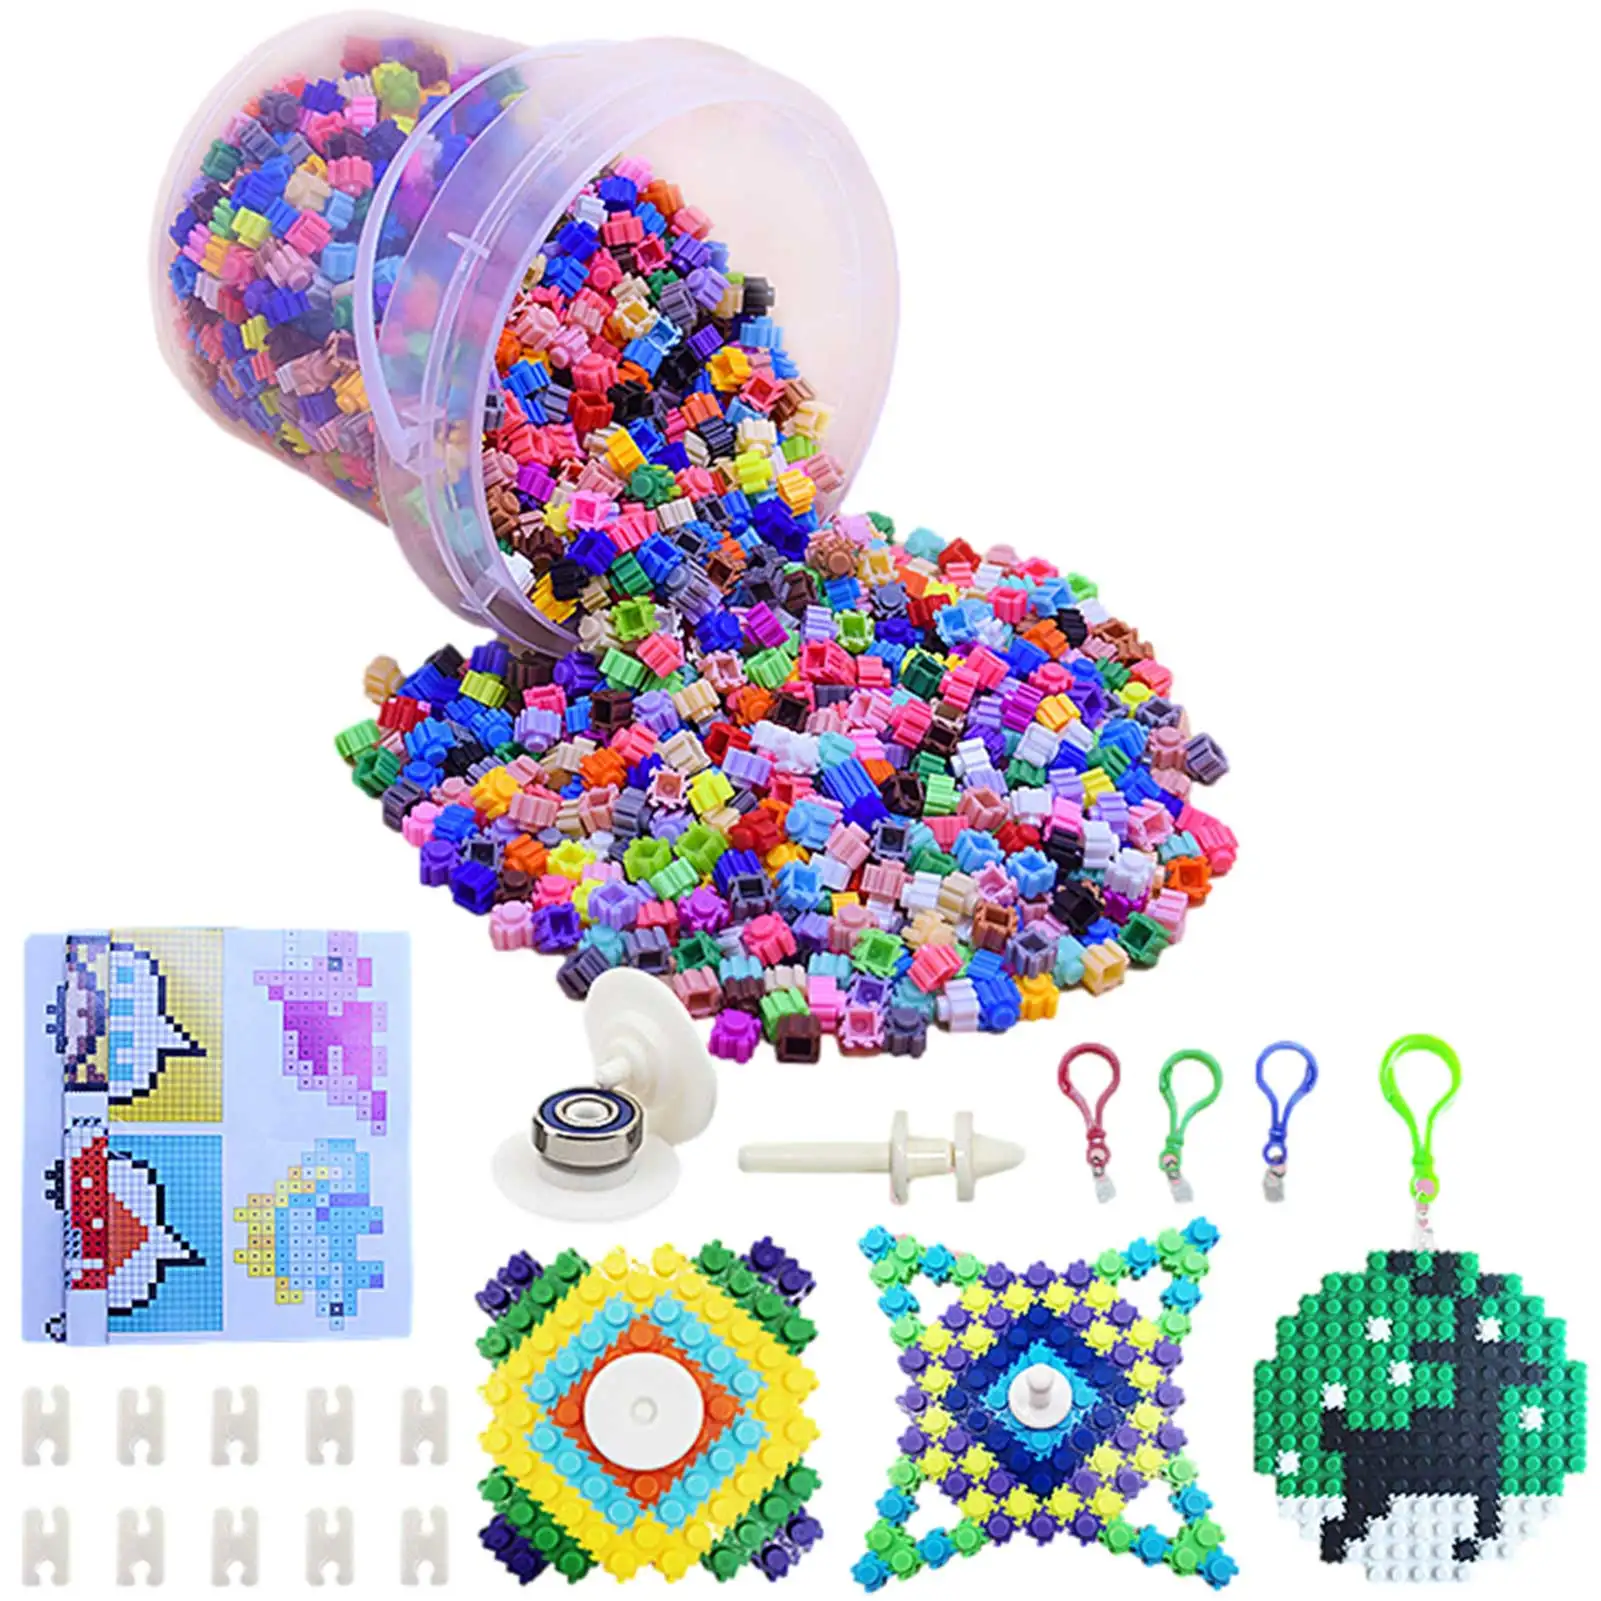 

8mm1550pcs Small Particle Building Blocks Assembling Blocks Set Toys Kids Educational Essentials Small Particle Assembly DIY Toy